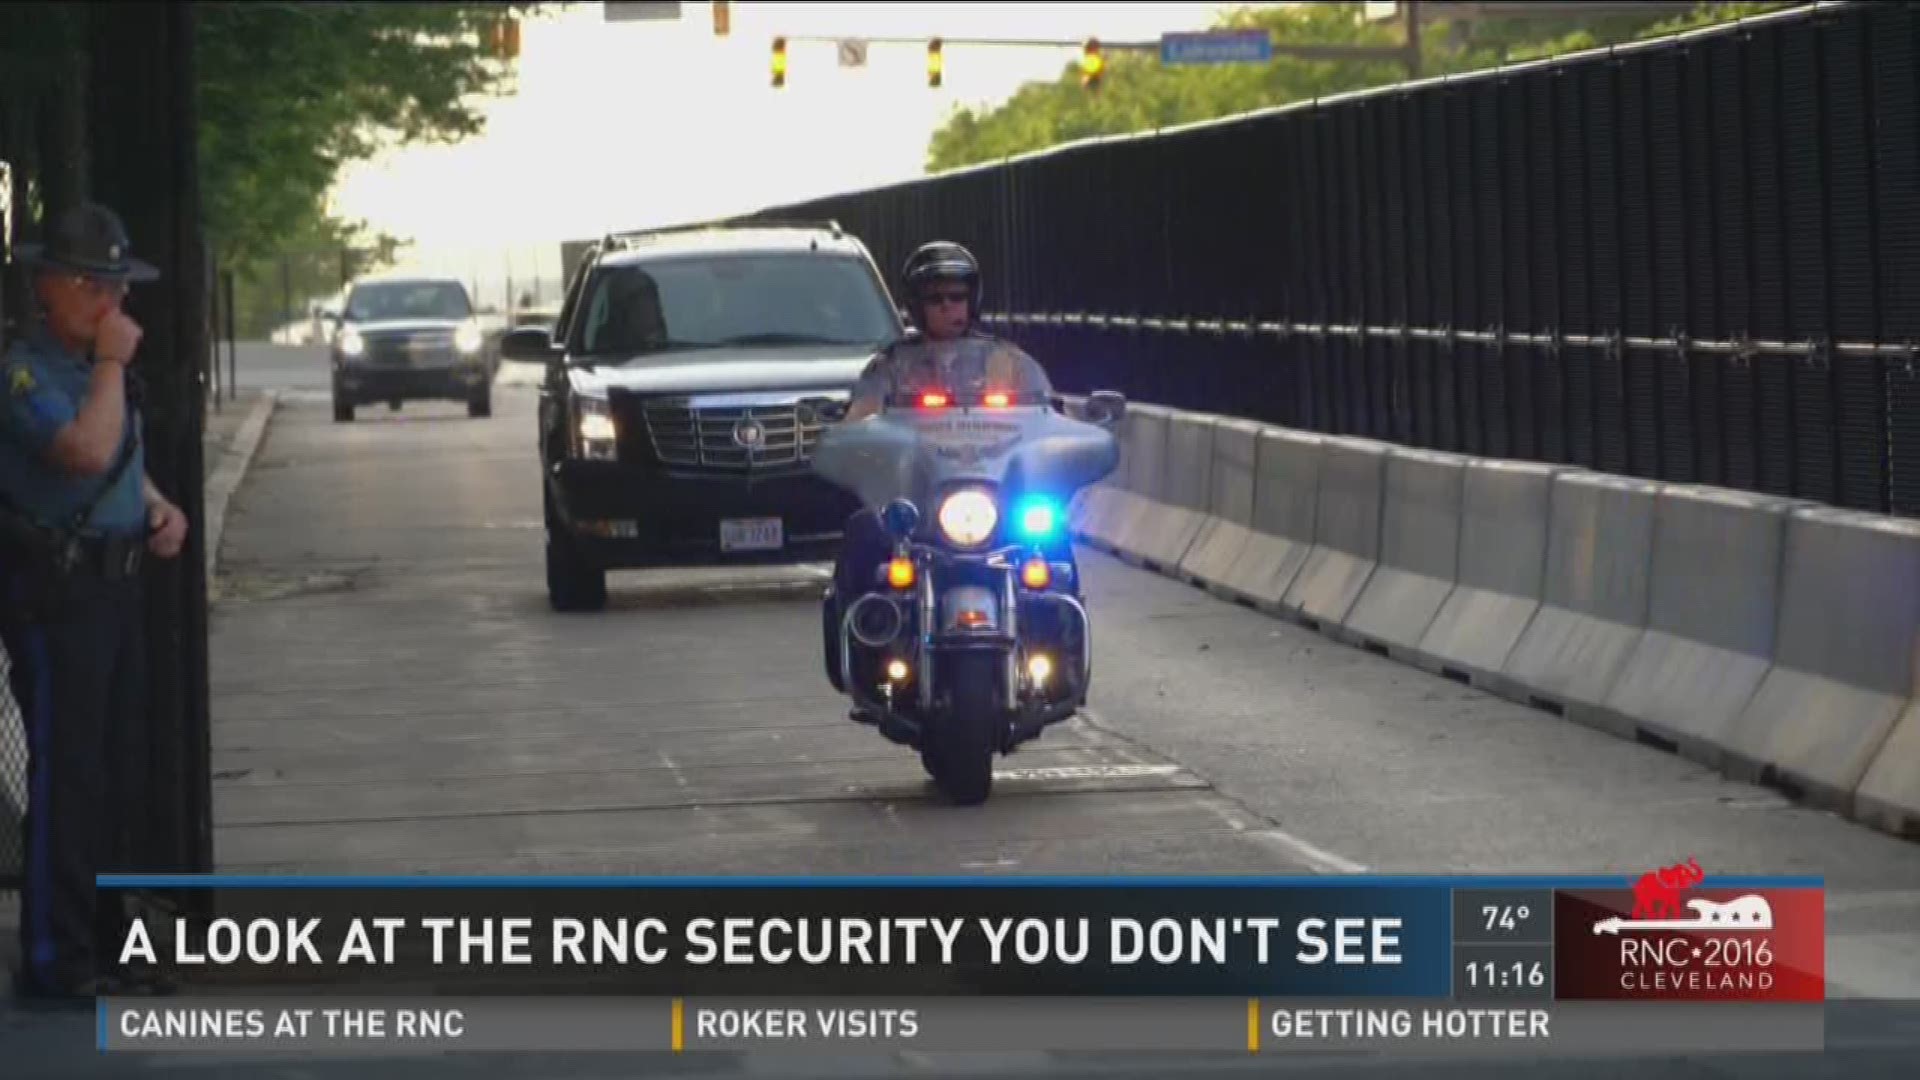 A look at RNC security you didn't see